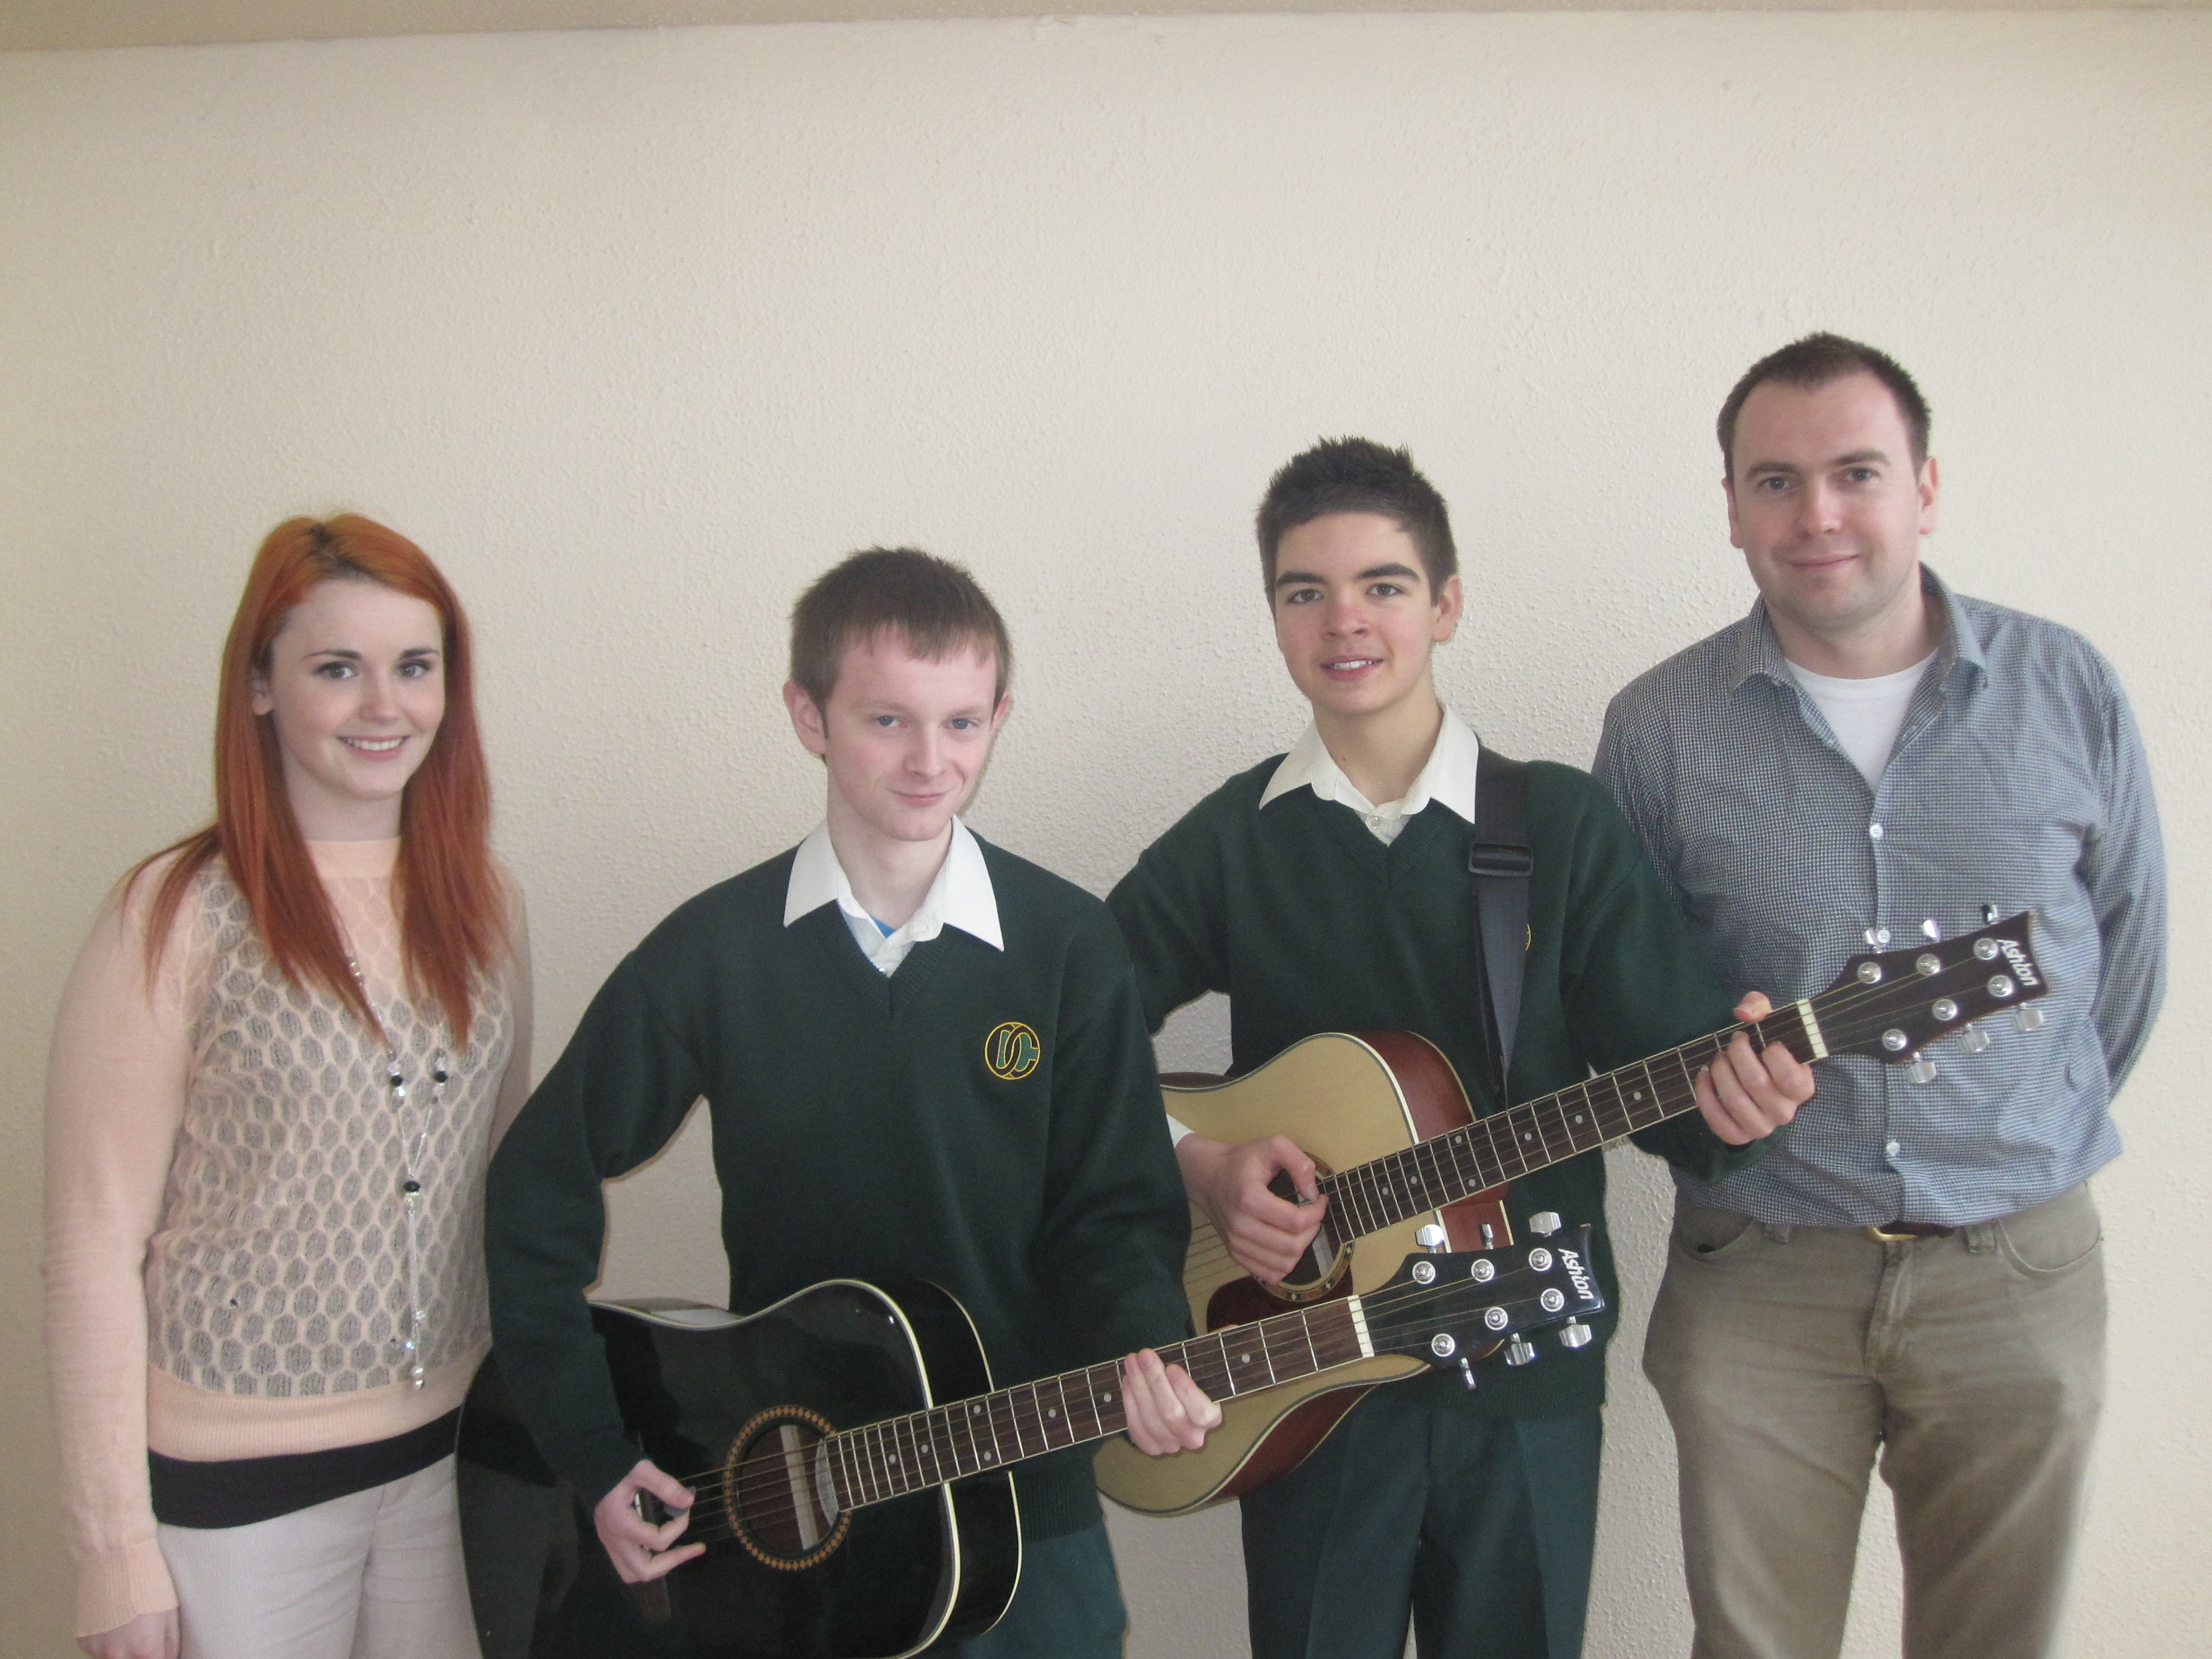 Congratulations to 2nd Year student Ethan Carey and 5th Year students Ethel Hoare and Cathal Noonan, who took part in the Semi-Final of “Our Schools Got Talent”.  We wish Ethan, who is accompanied by Cathal, the very best of luck in the Final of the competition which is due to take place on Sunday 27th January 2013 in the TF Royal Theatre, Castlebar